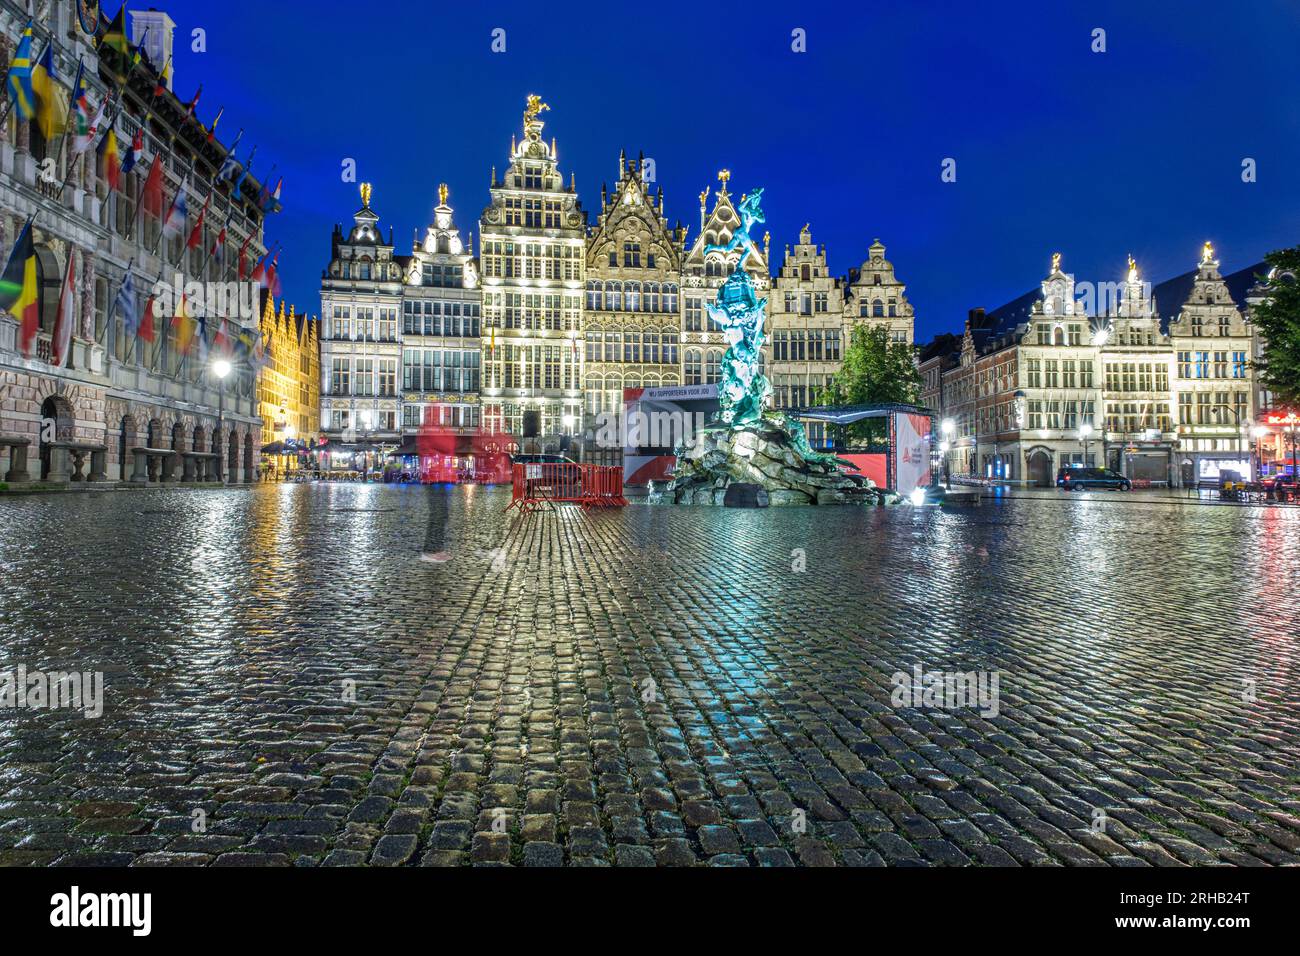 Anvers, Belgium - 9 September 2022: Antwerp cityscape with traditional brick houses on Groenplaats at night Stock Photo